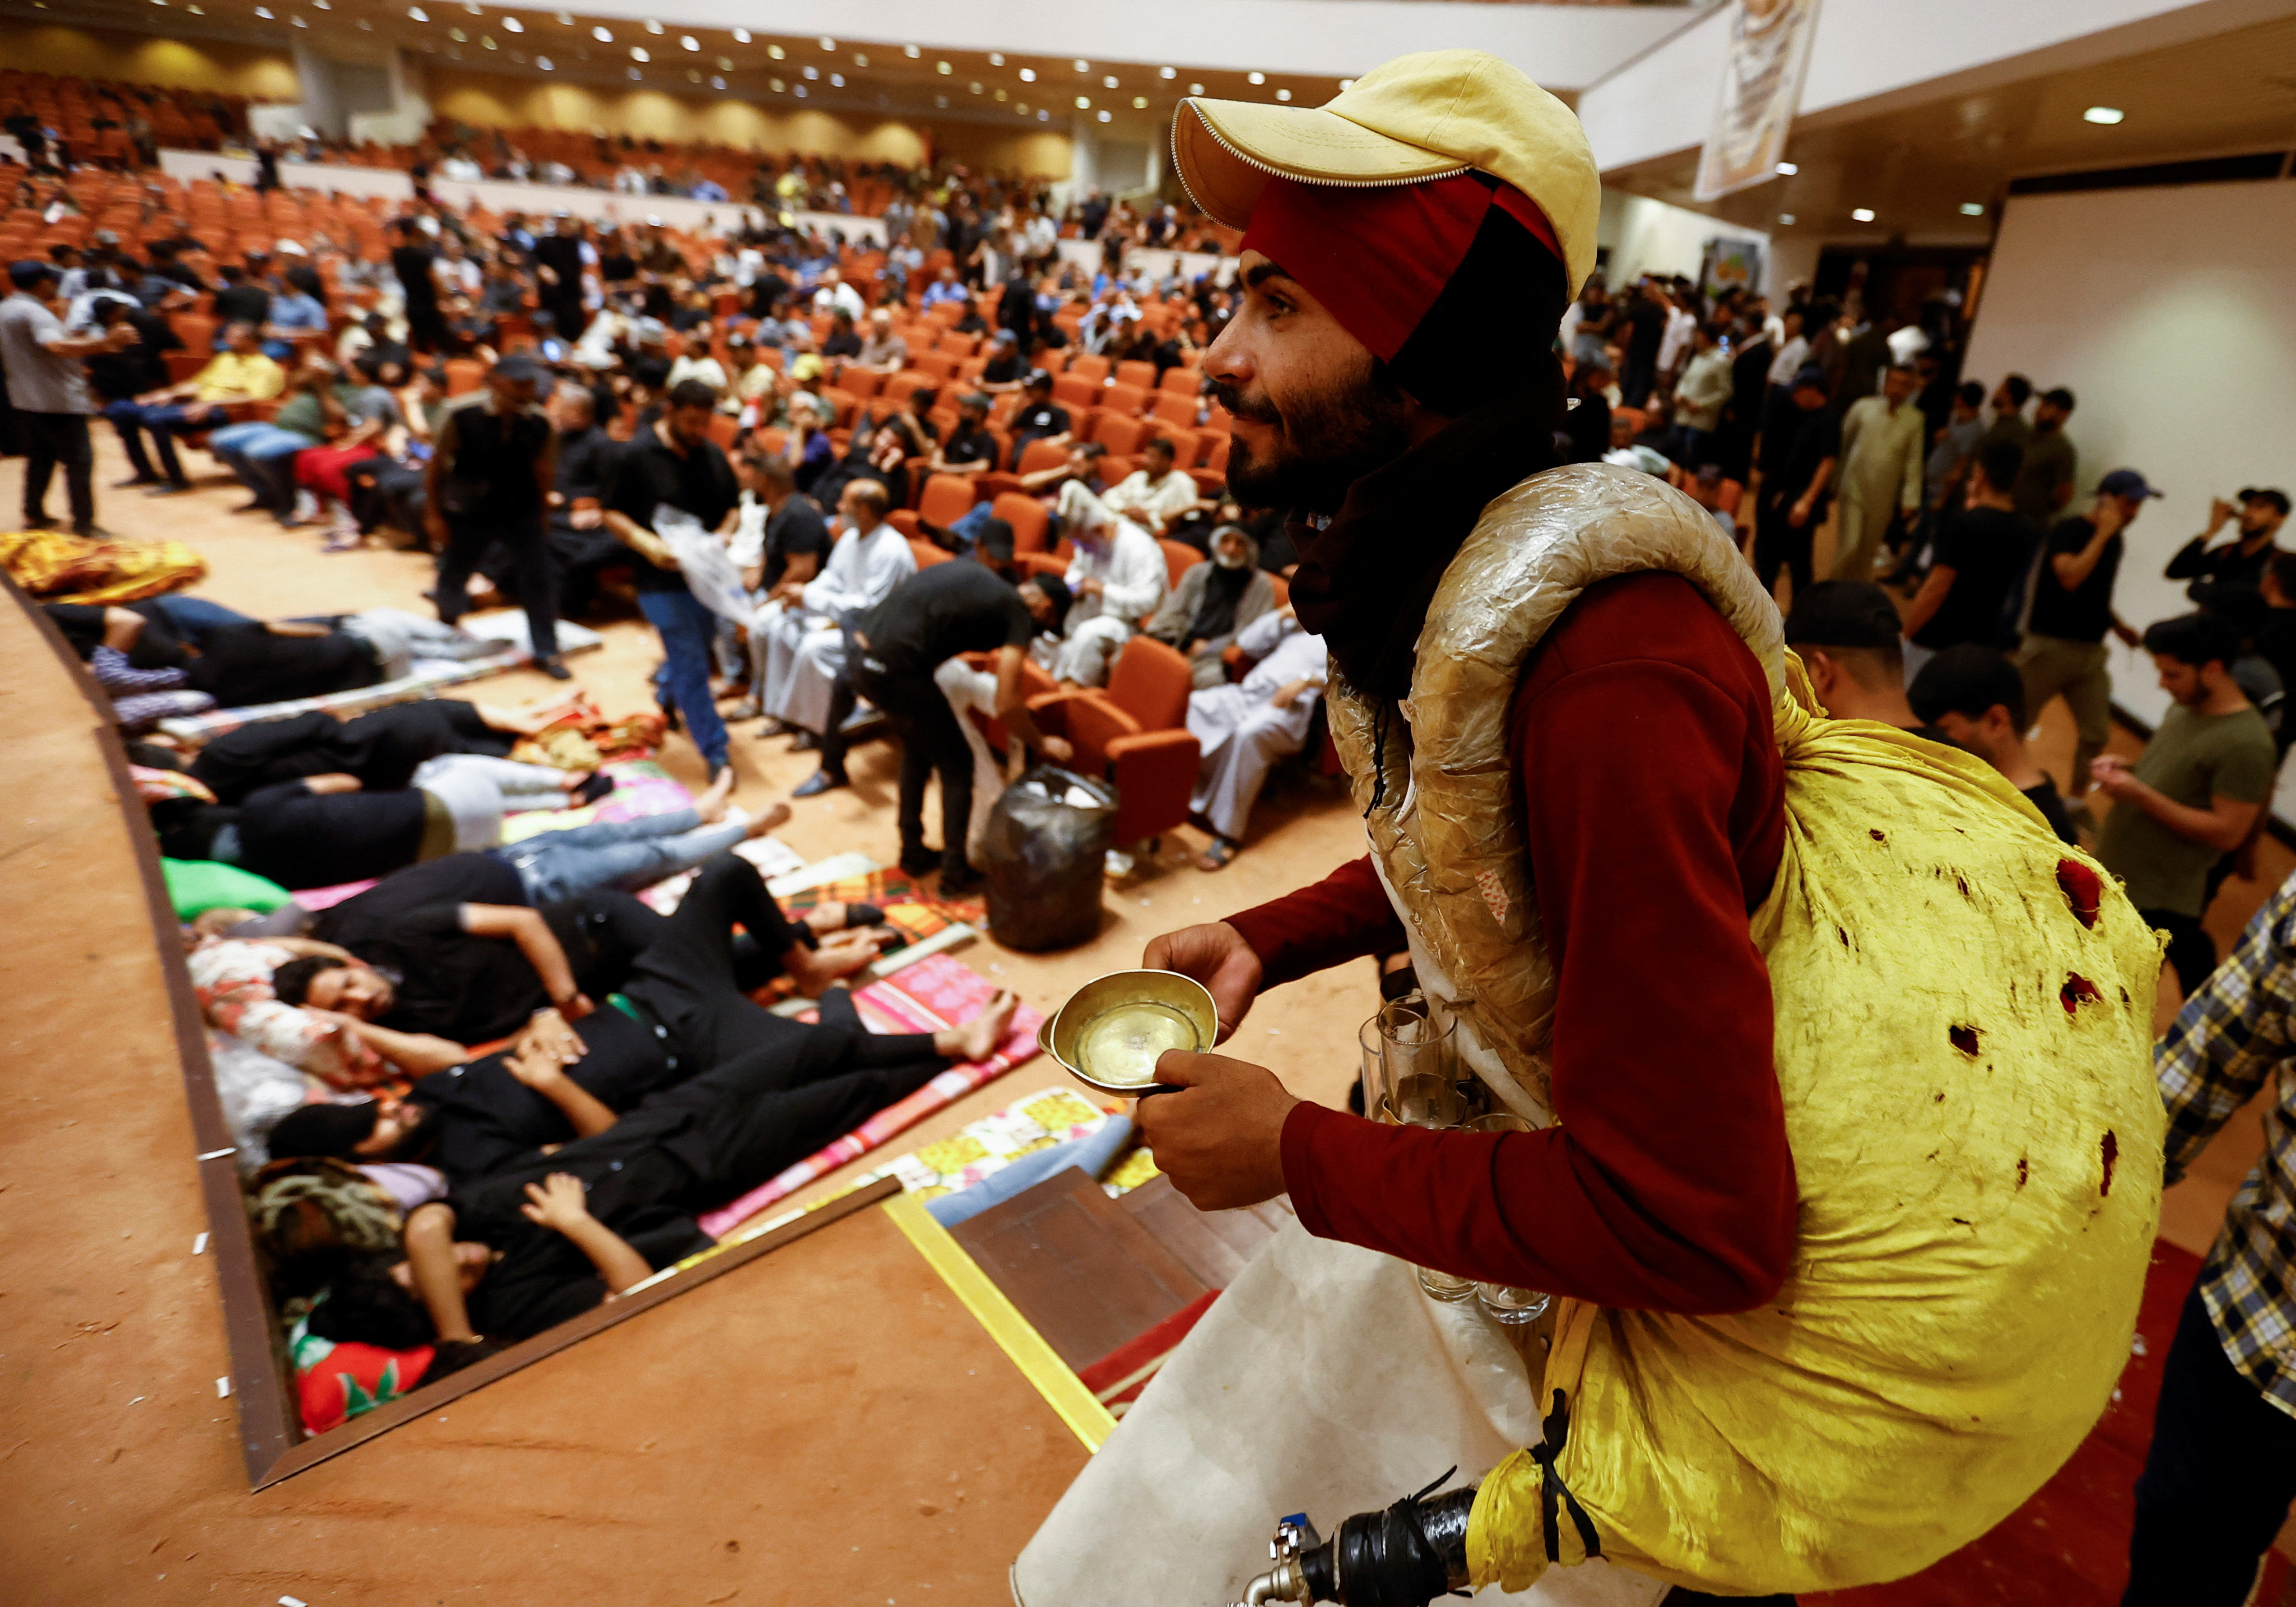 An Iraqi peddler sells juice as supporters of Iraqi Shi'ite cleric Muqtada al-Sadr gather during a sit-in, inside the parliament building amid political crises in Baghdad